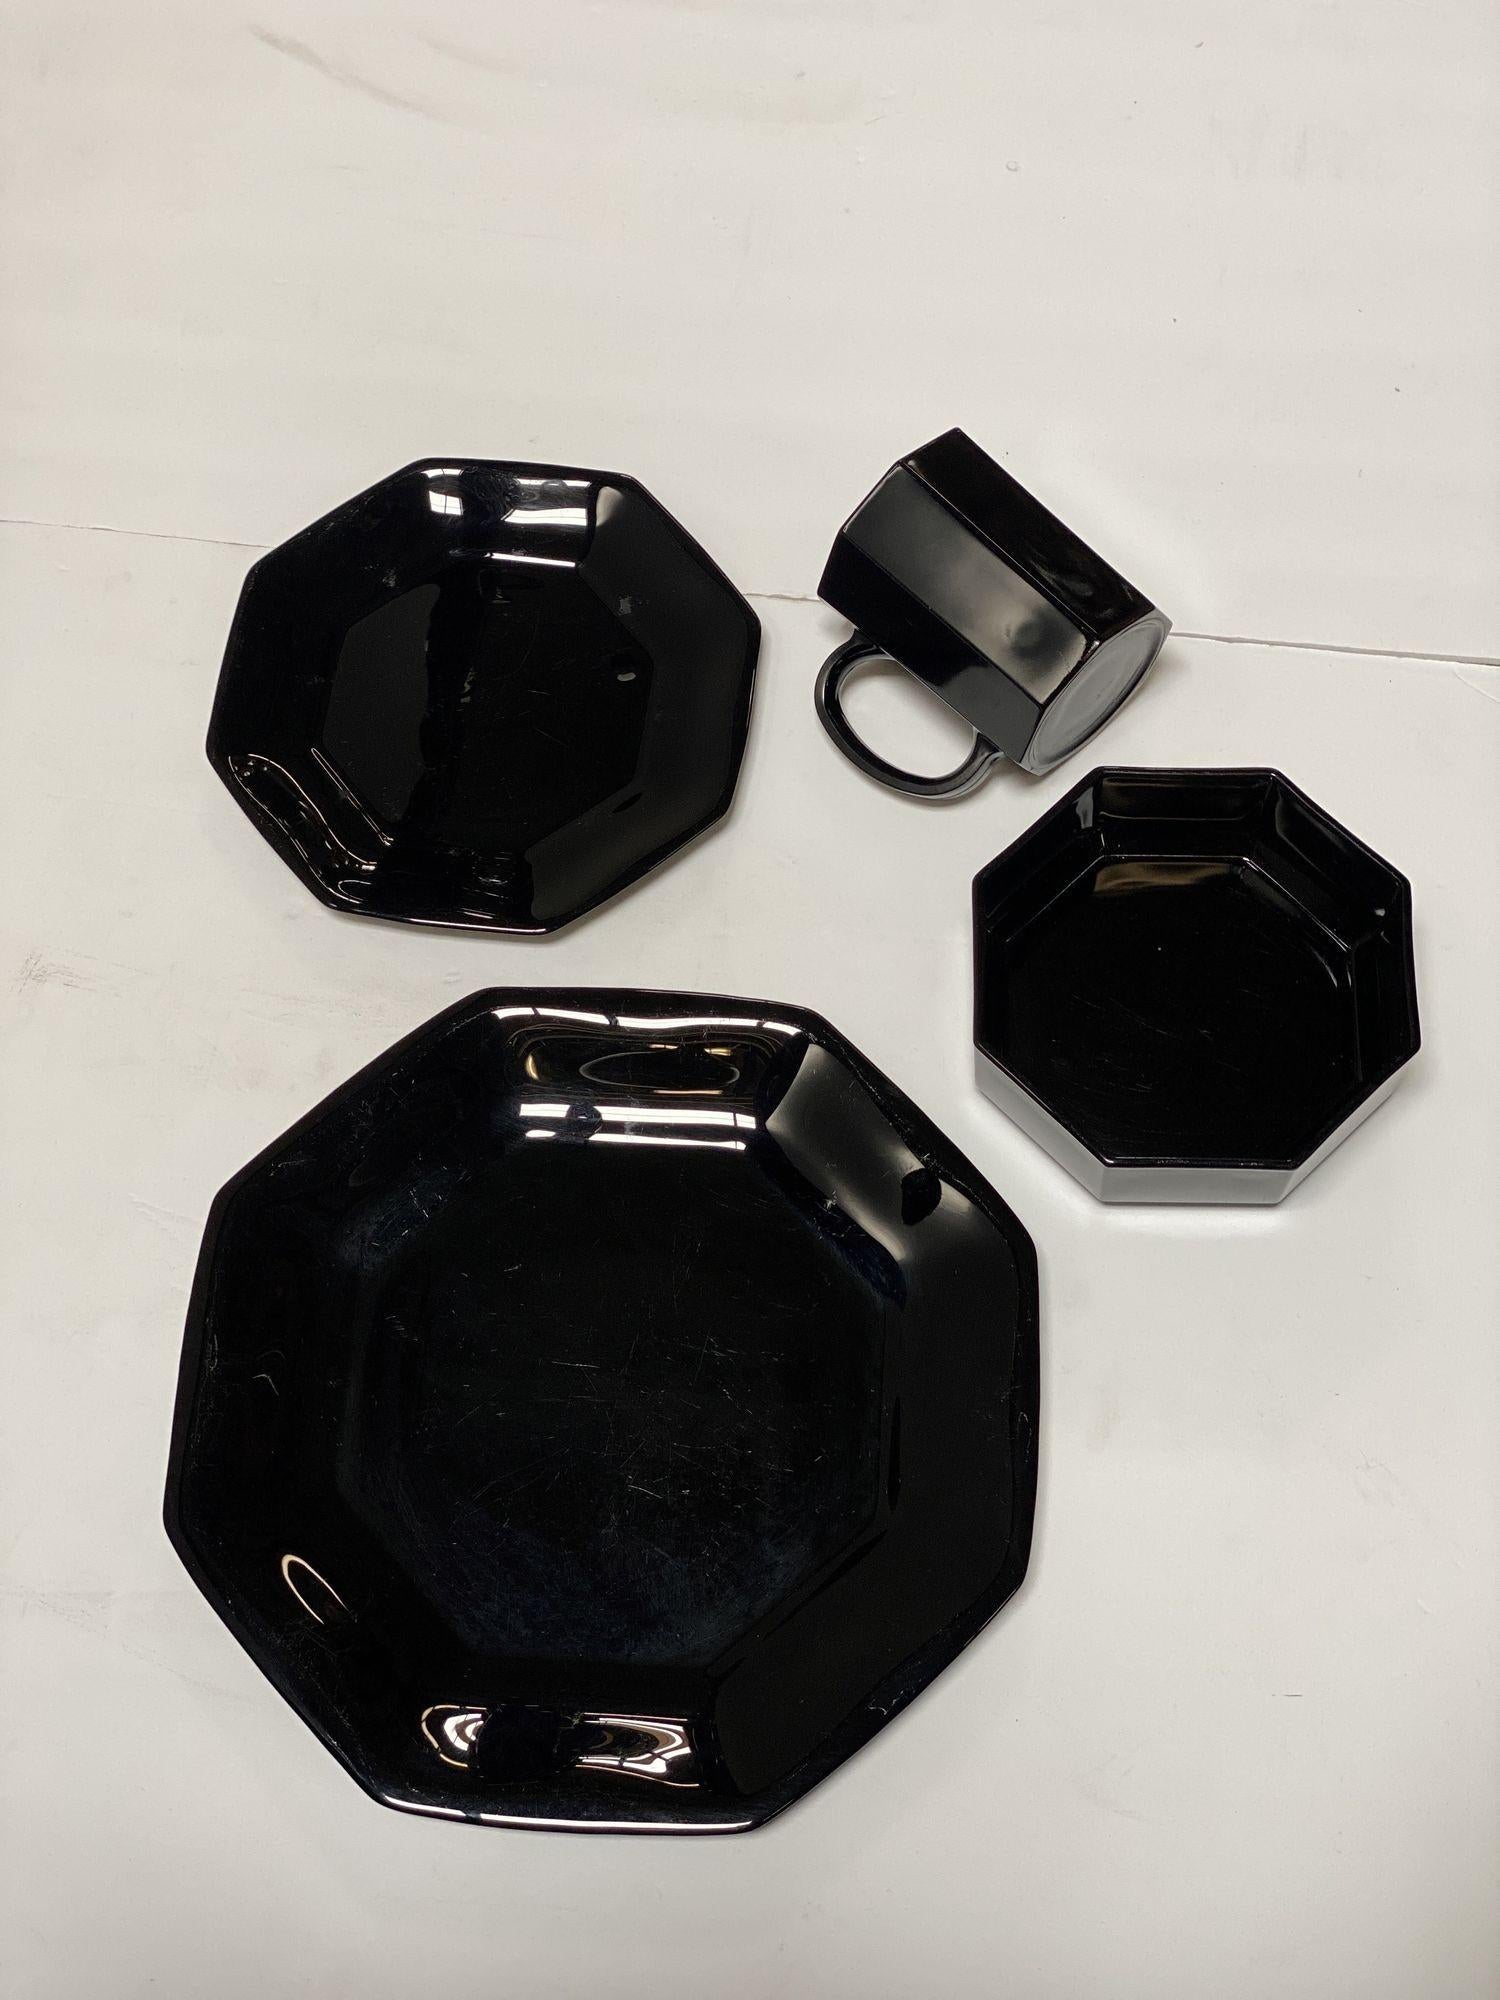 Mid-Century Black Octagonal 20-piece dinnerware set crafted by Arcoroc France.
The set consists of 
6 mugs (4” tall, 3” dia)
7 bowls (6